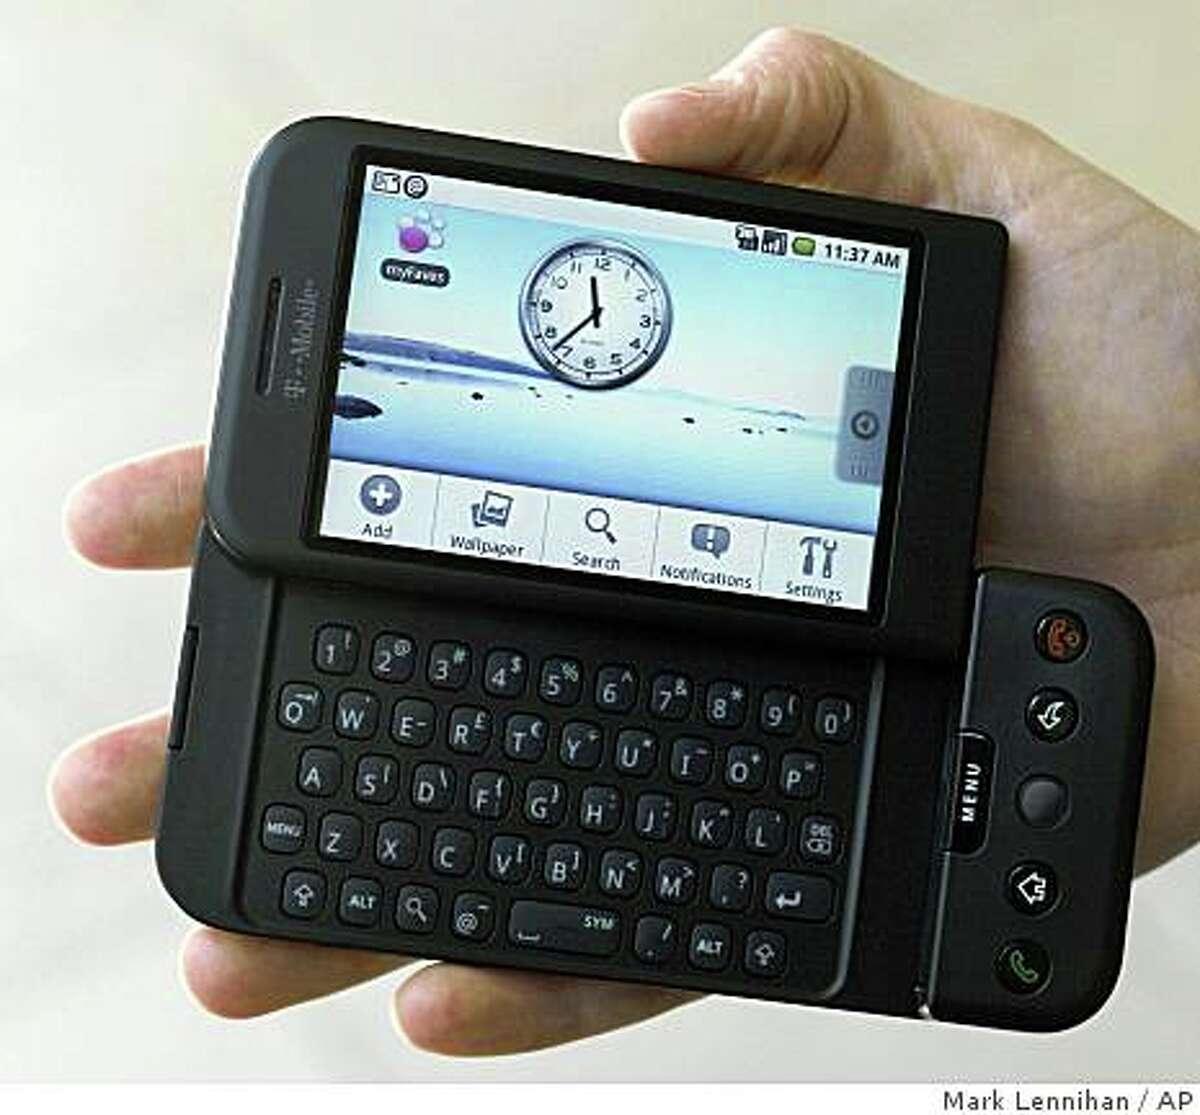 Google G1 - First Android Phone